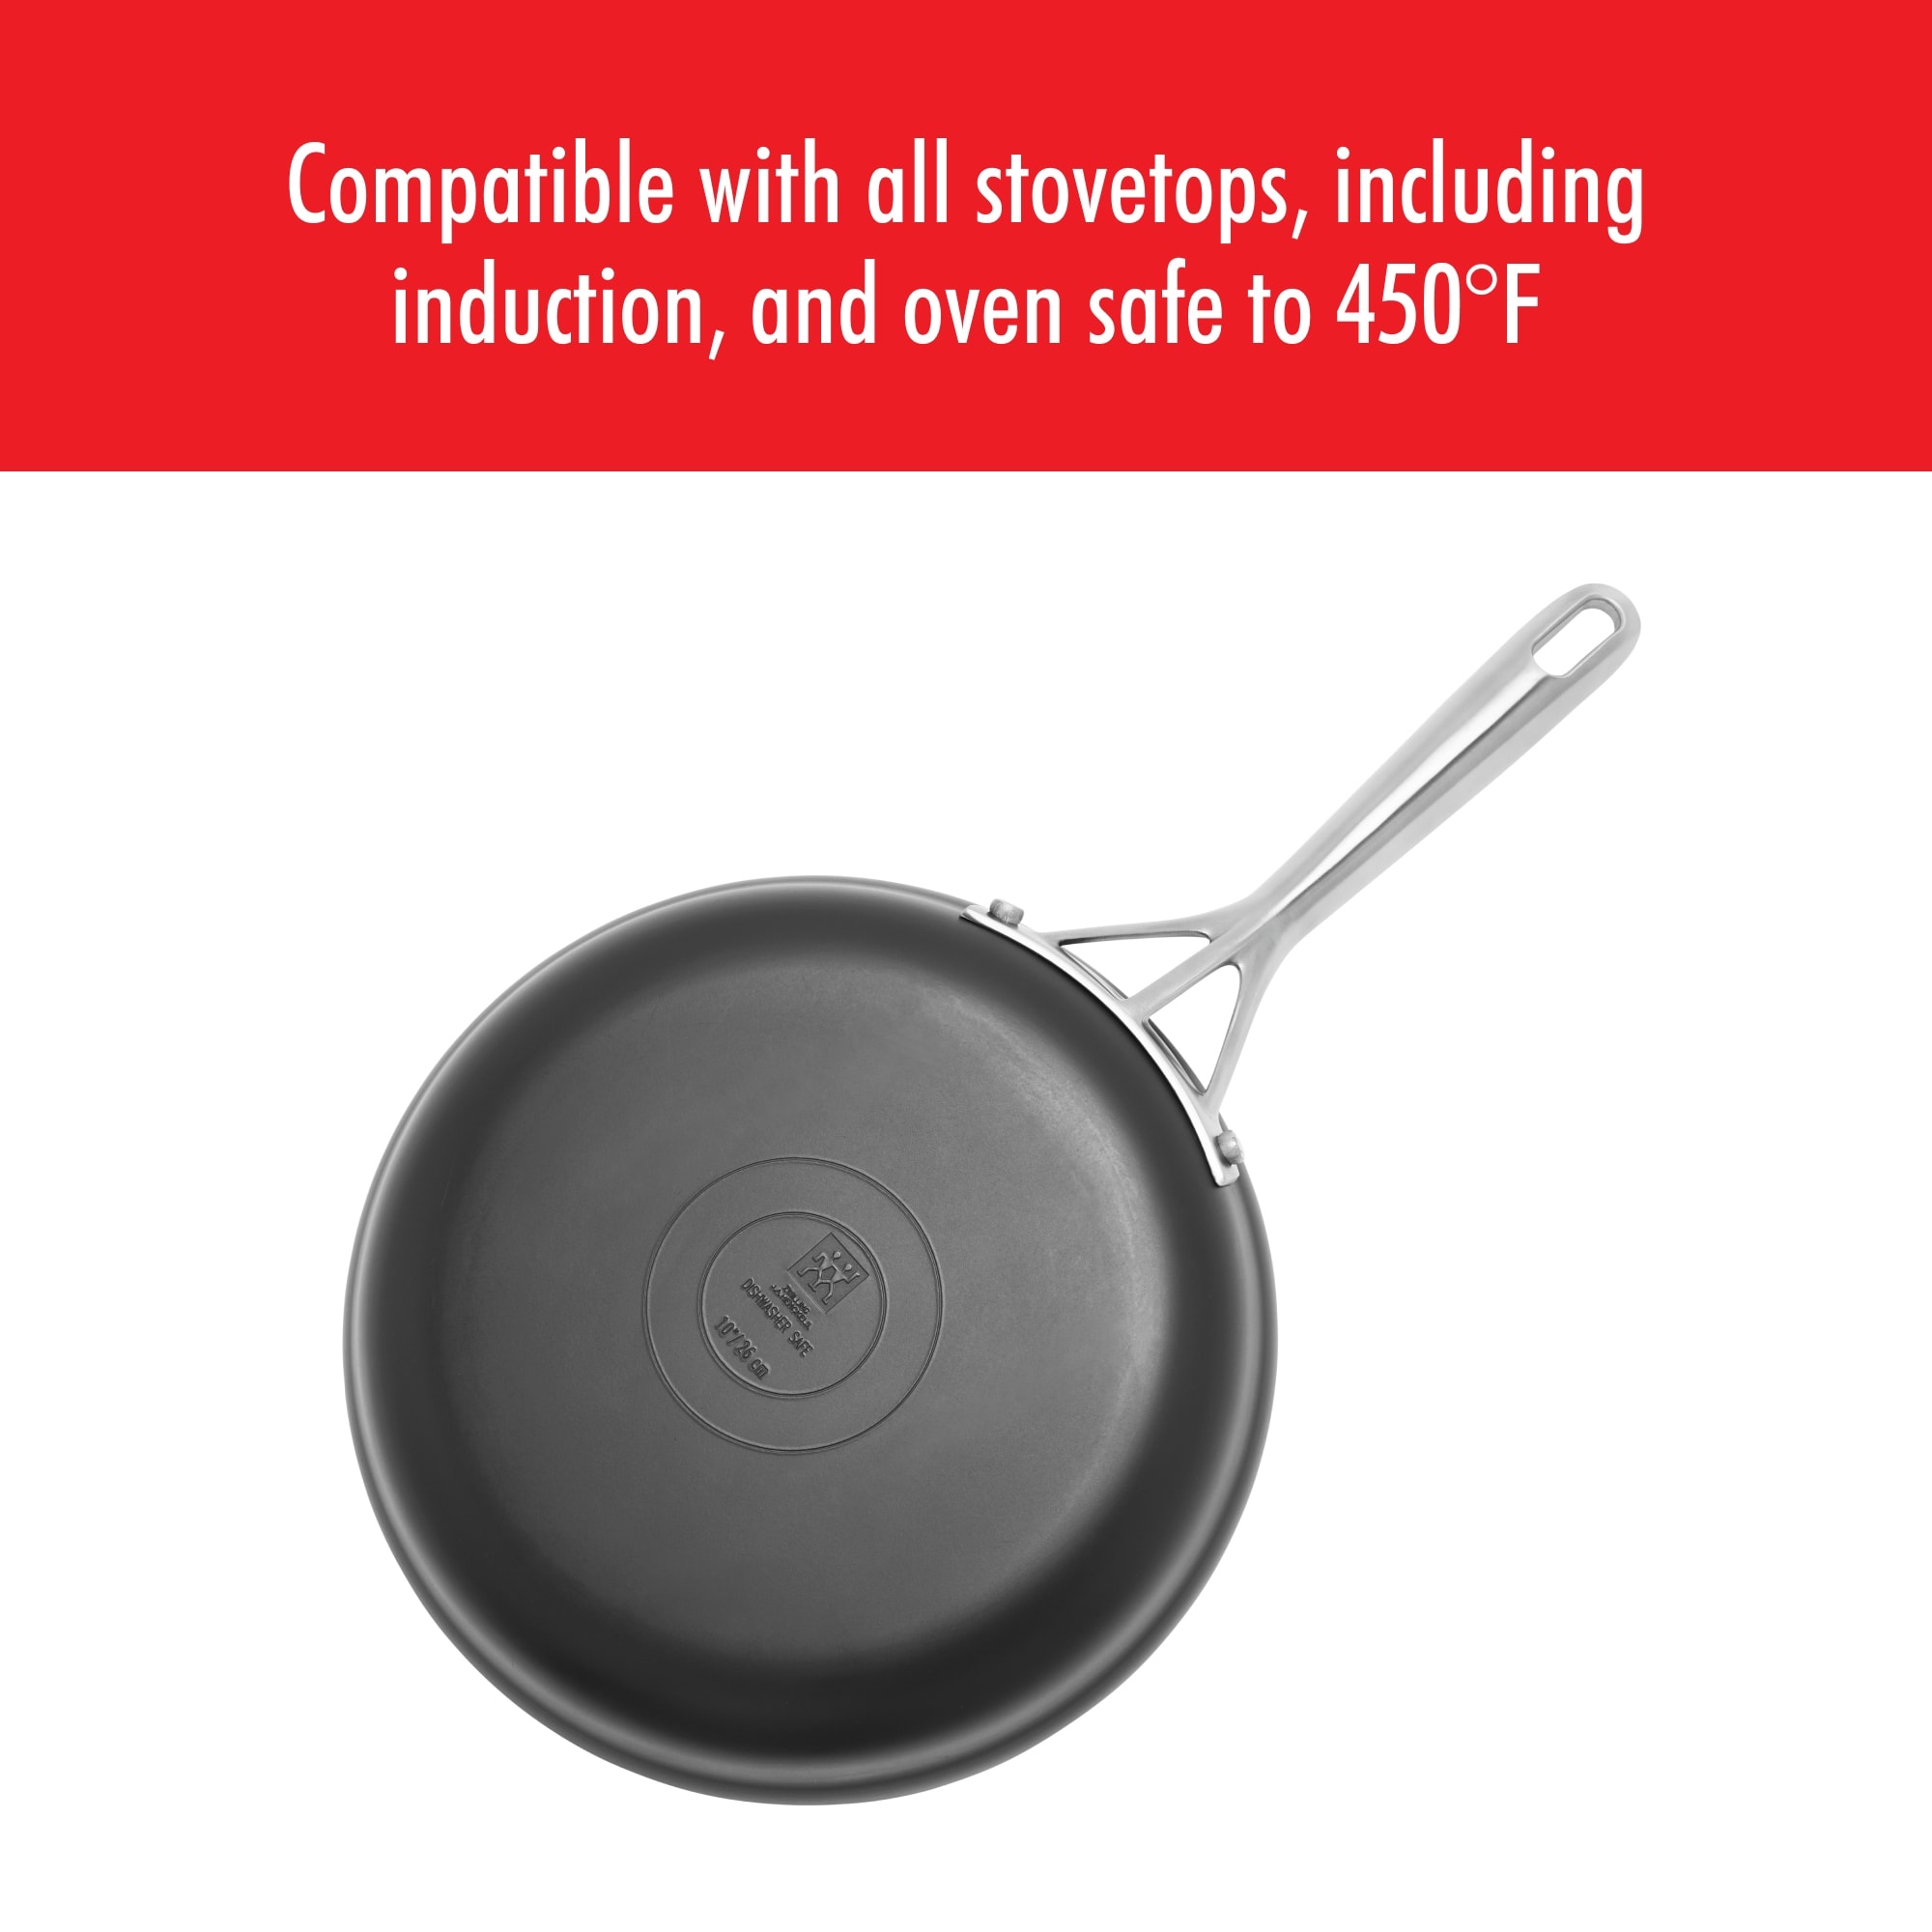 https://ak1.ostkcdn.com/images/products/is/images/direct/0e21ce0138bfc11bda2c60d0a615b4420d609e58/ZWILLING-Motion-Hard-Anodized-Aluminum-Nonstick-Fry-Pan.jpg